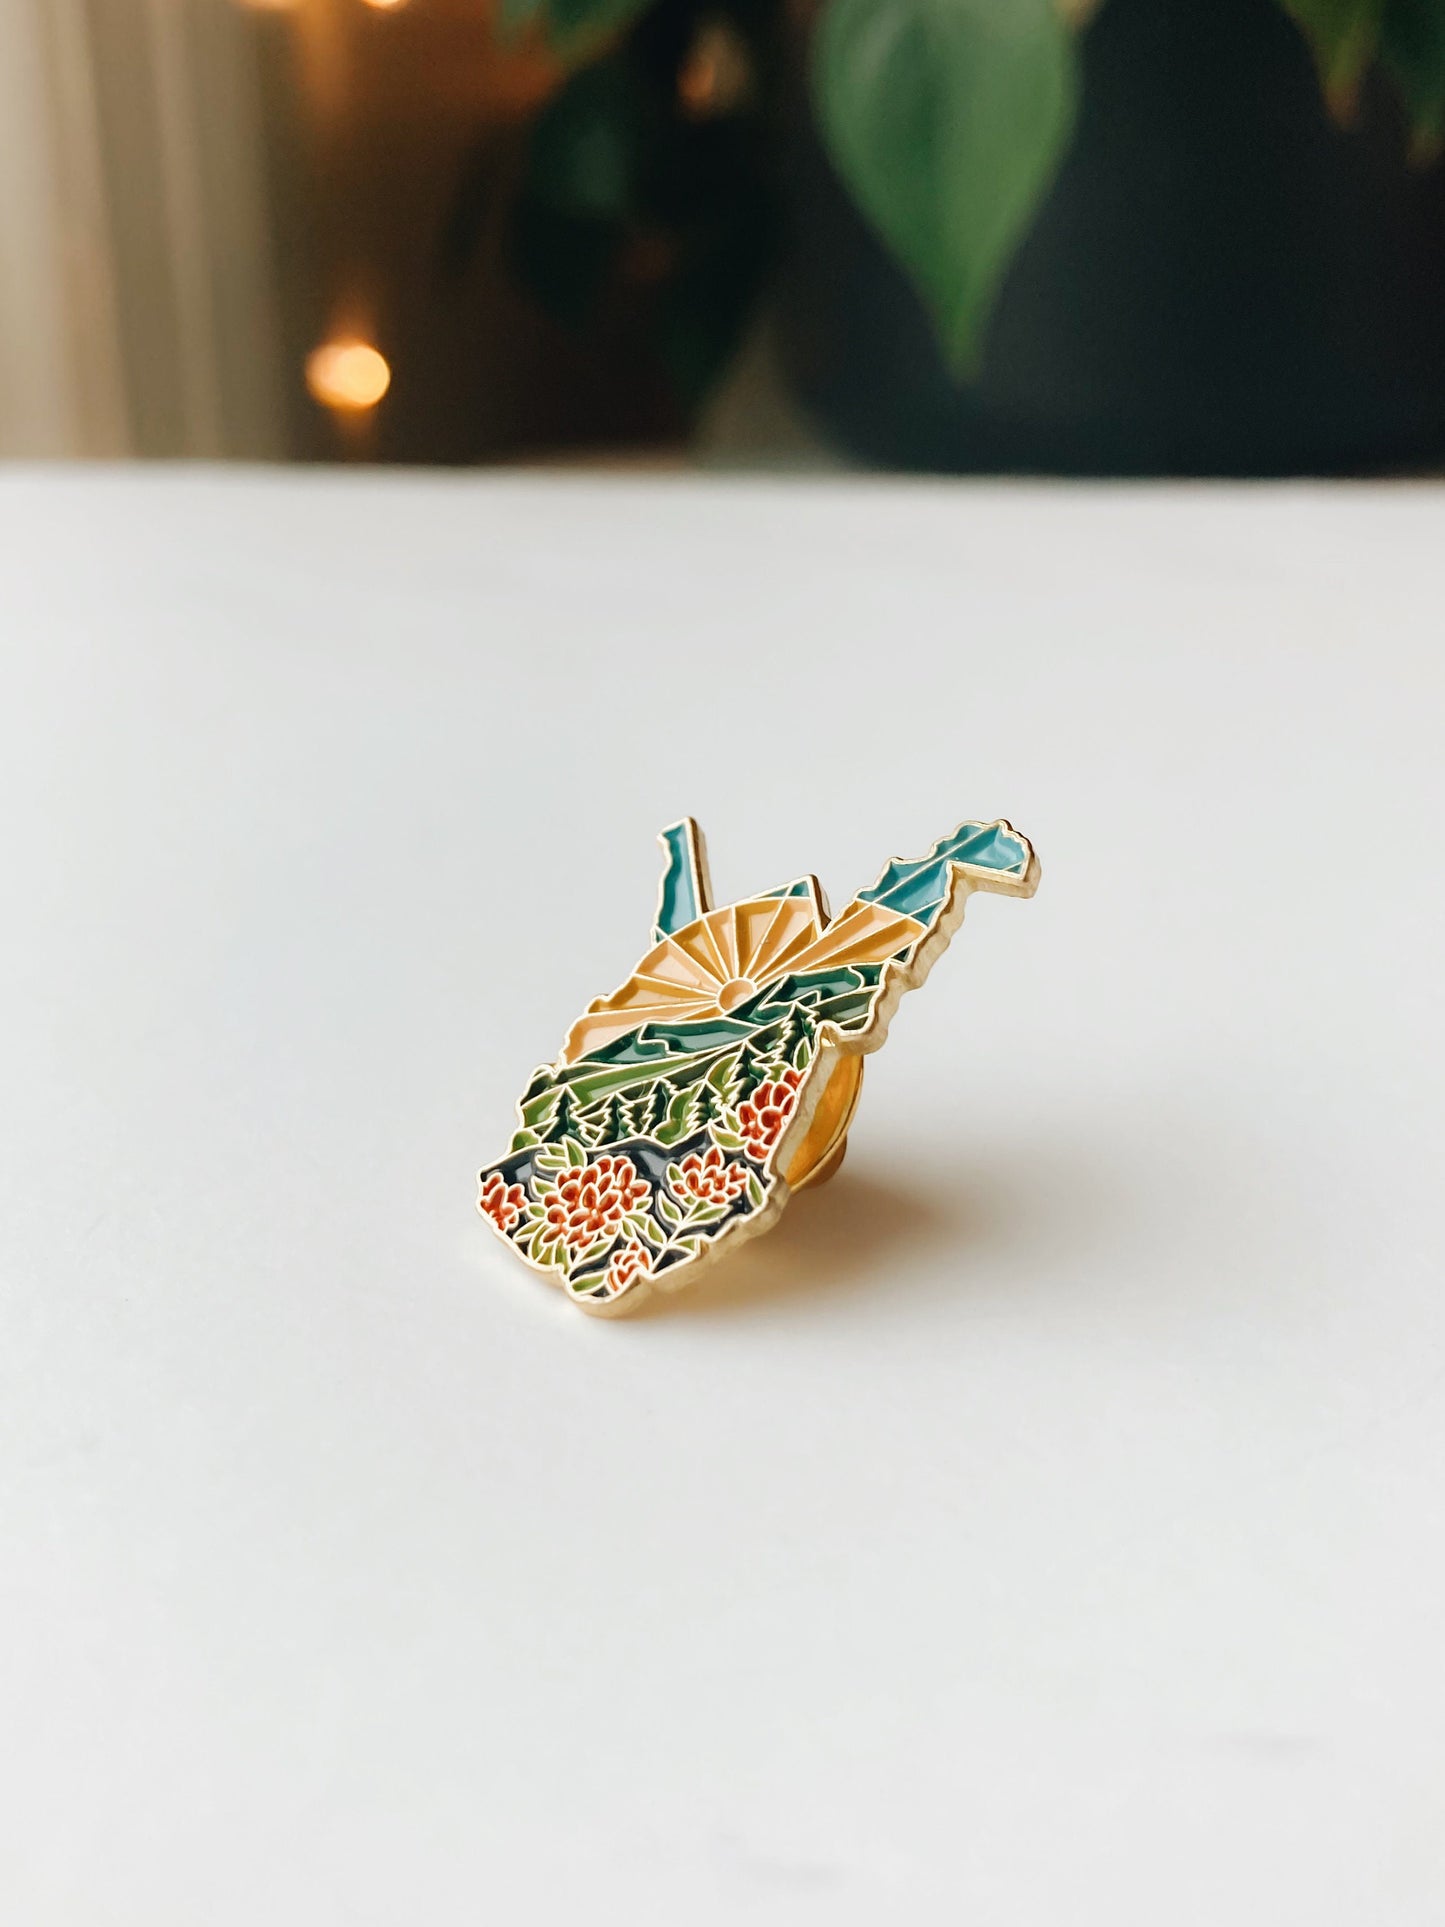 West Virginia Enamel Pin | Gold Soft Enamel Pin | Illustrated United States Pin | Butterfly Clasp | 1.25"